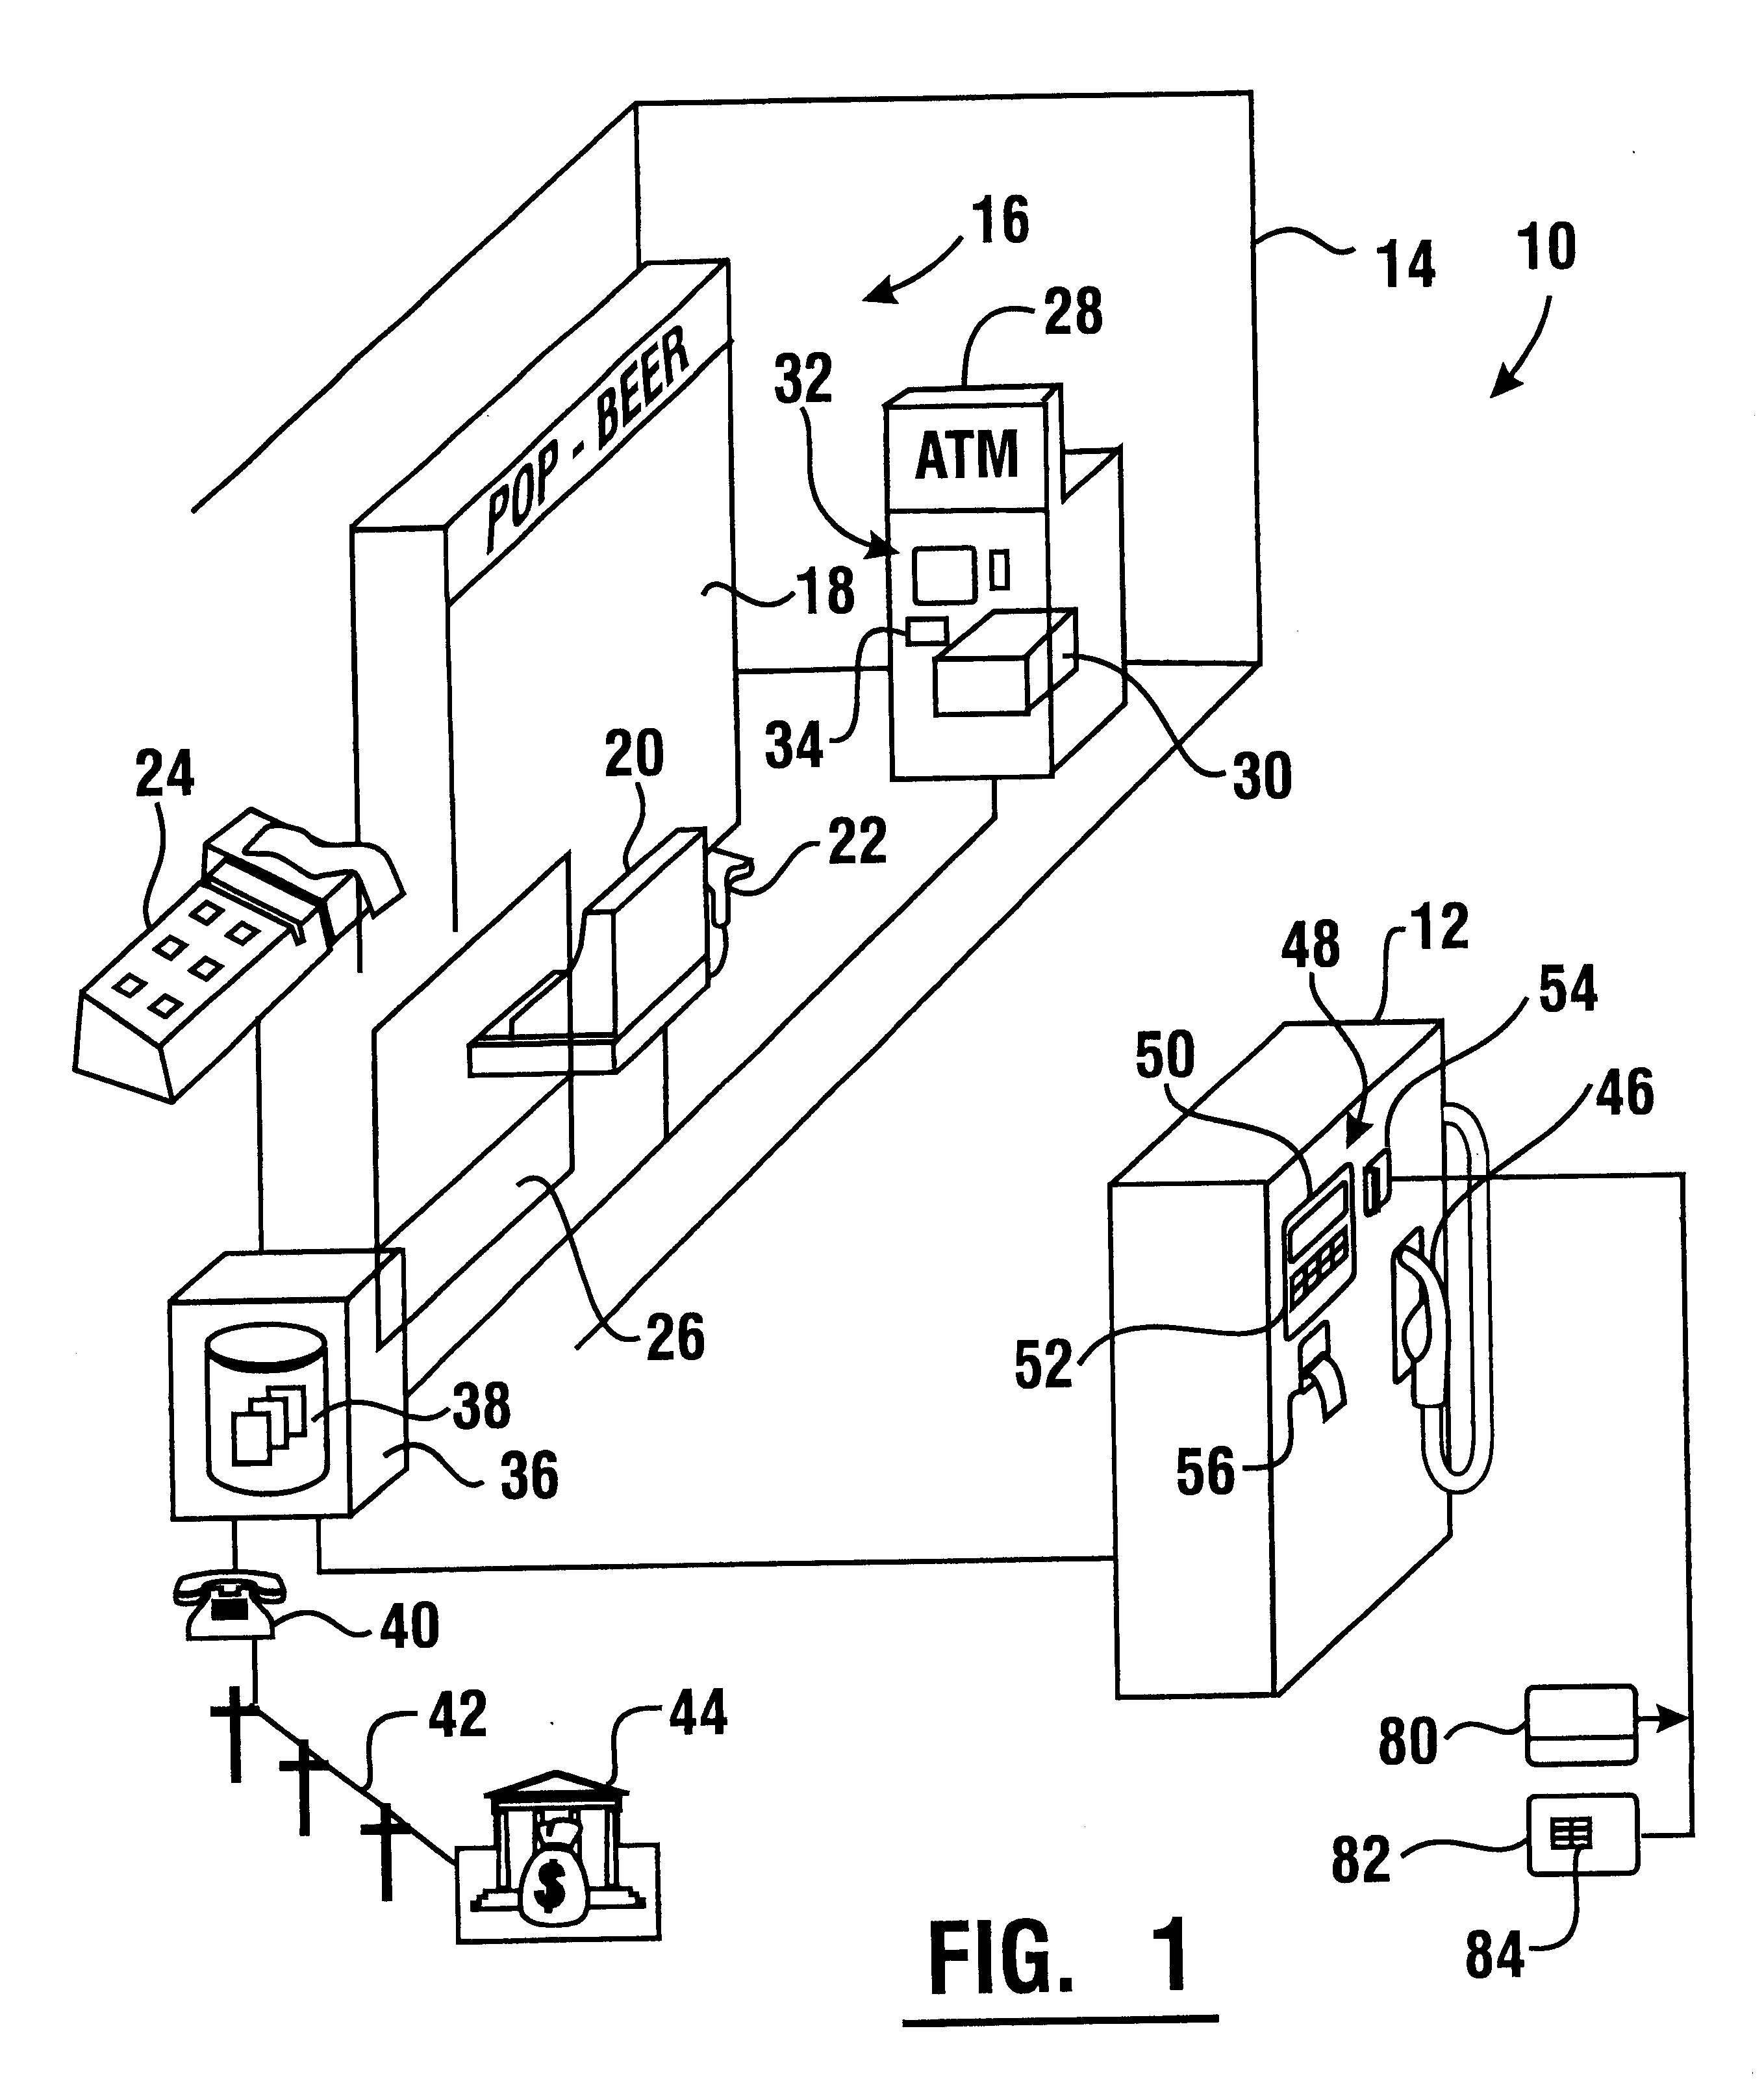 Cash dispensing system for merchandise delivery facility